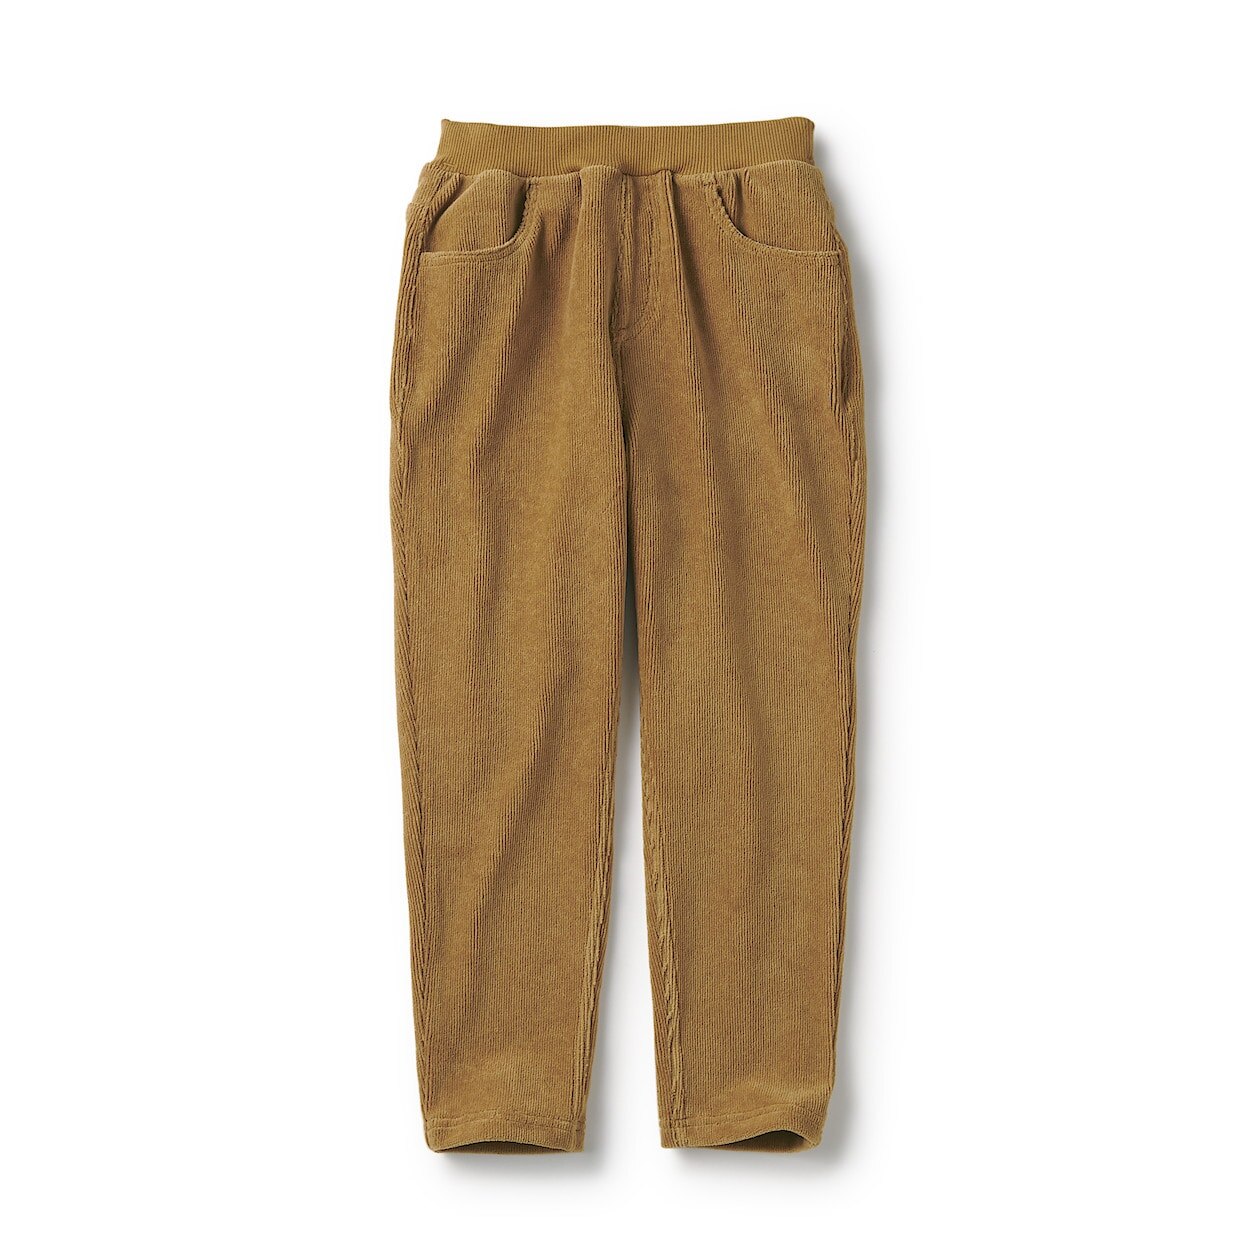 Buy Olive Grey Trousers  Pants for Men by NETPLAY Online  Ajiocom